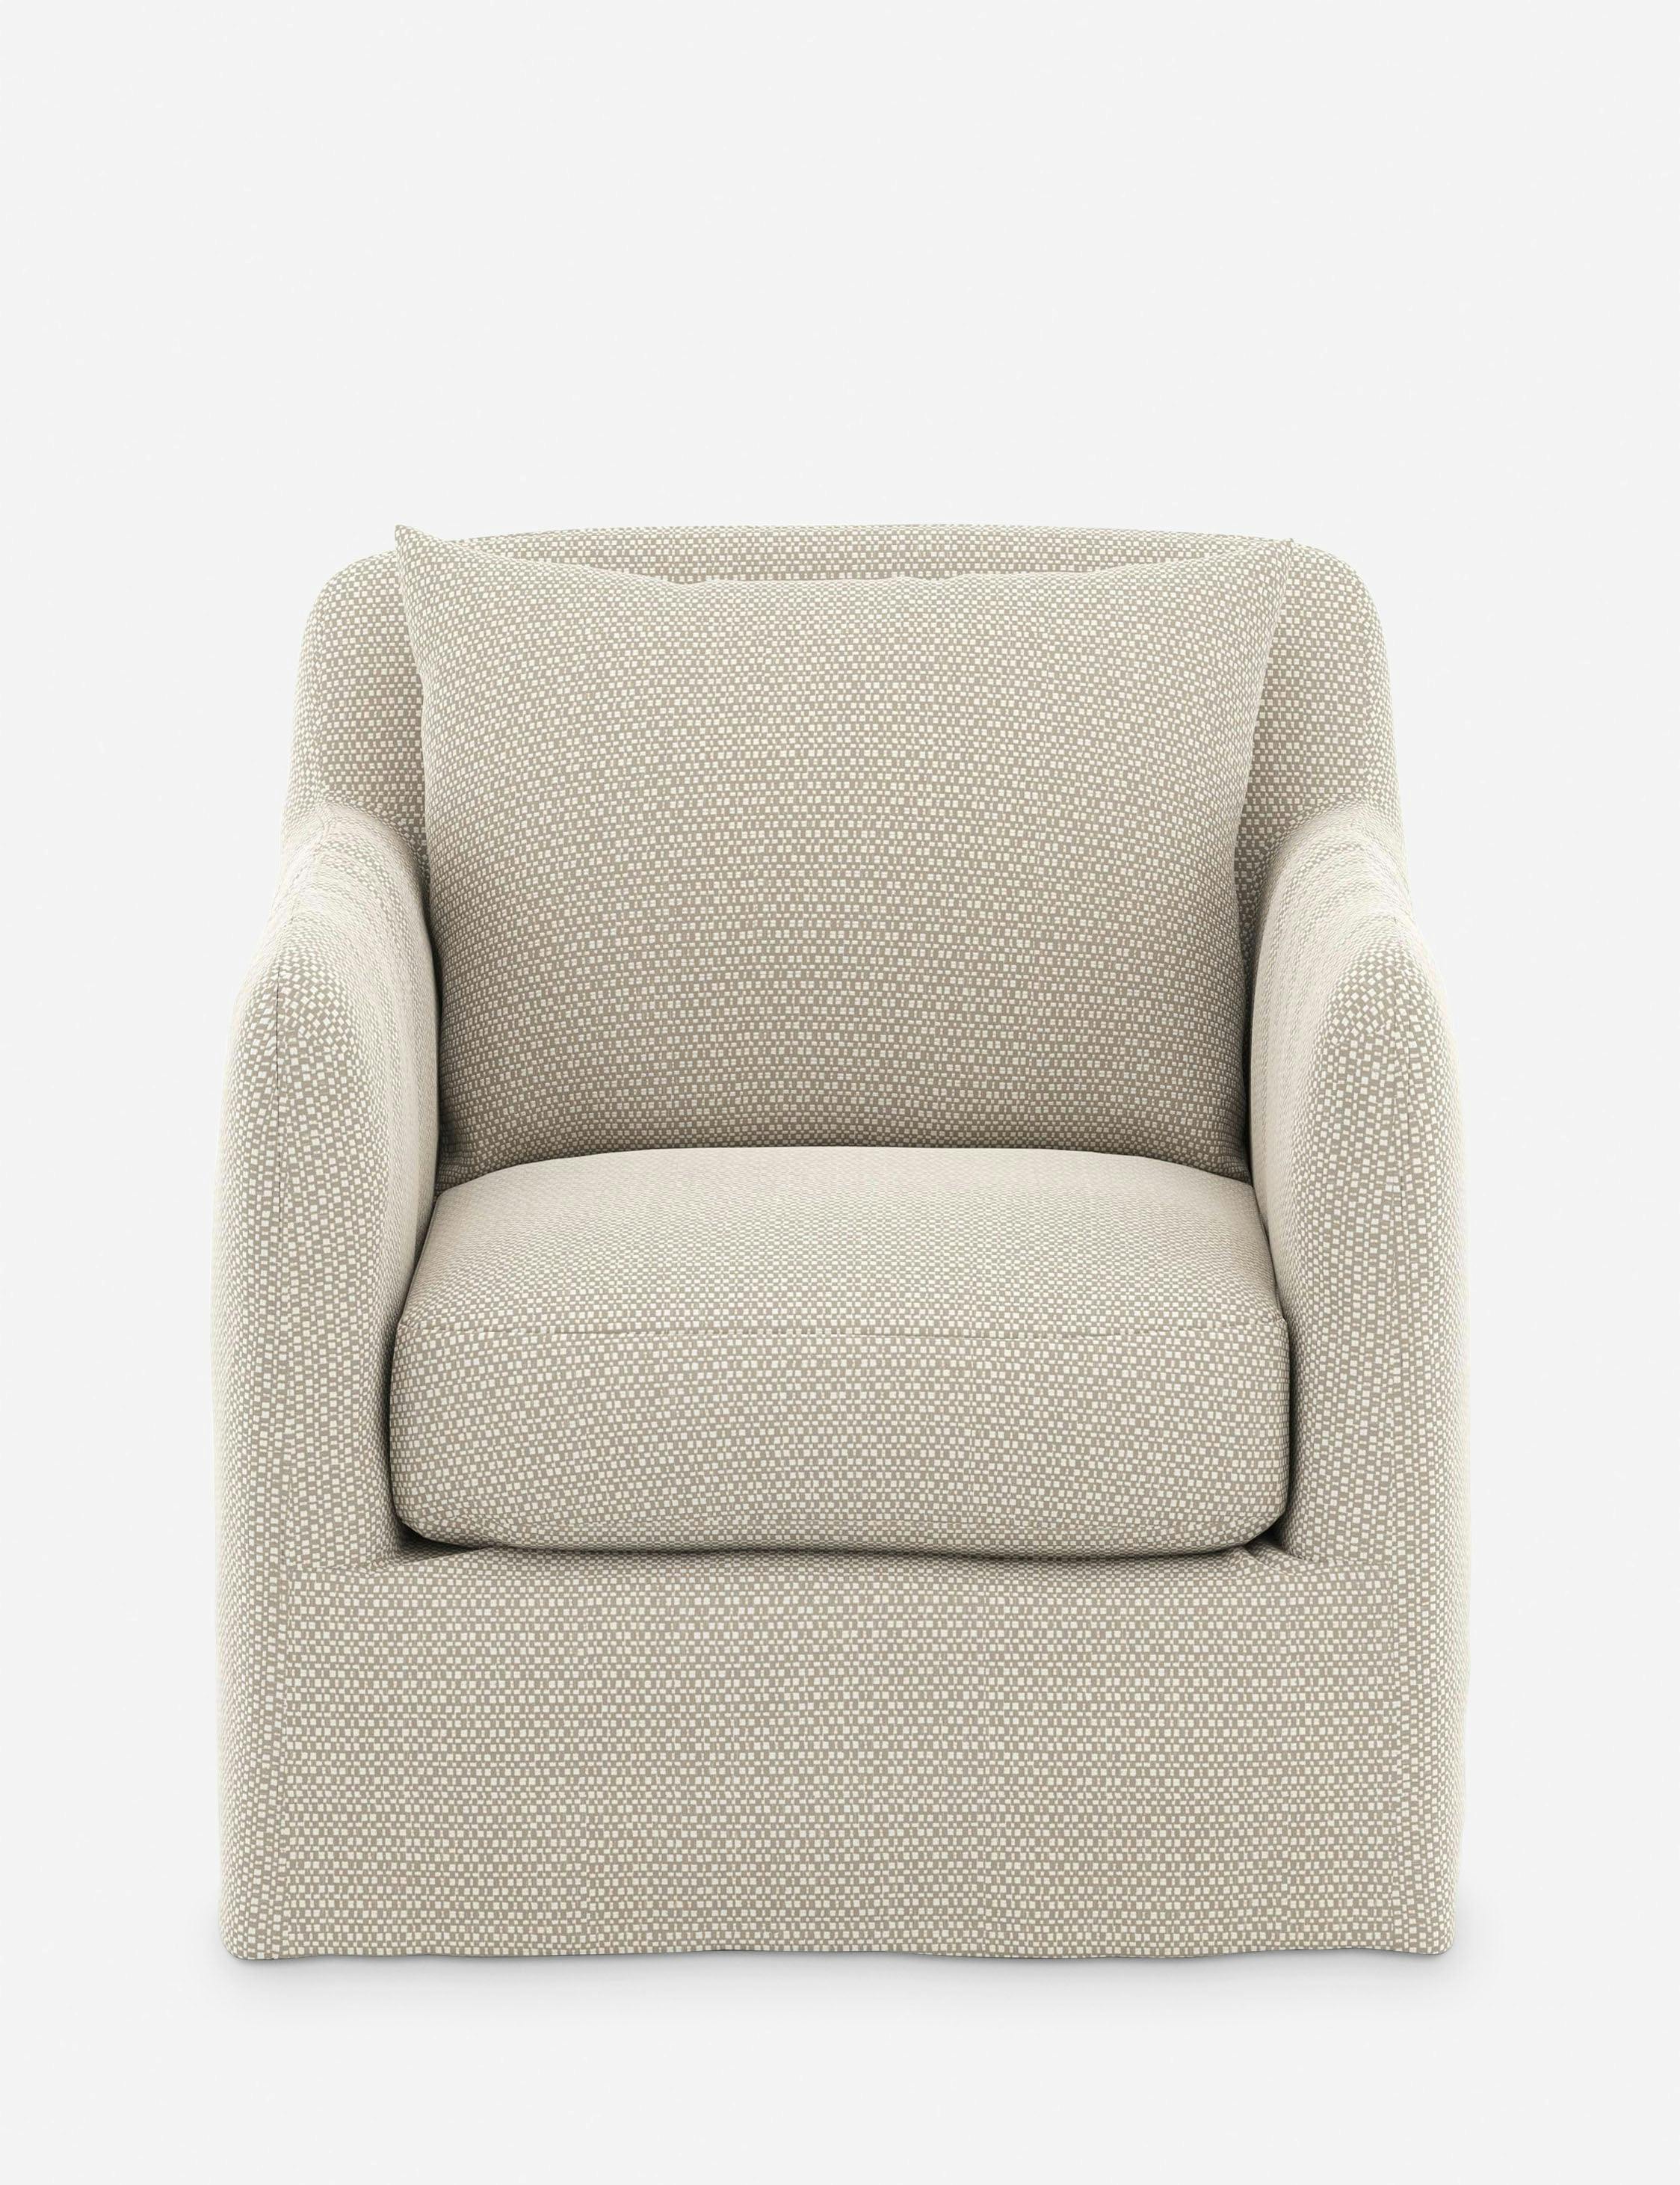 Contemporary Beige Swivel Dining Chair with Plush Cushions